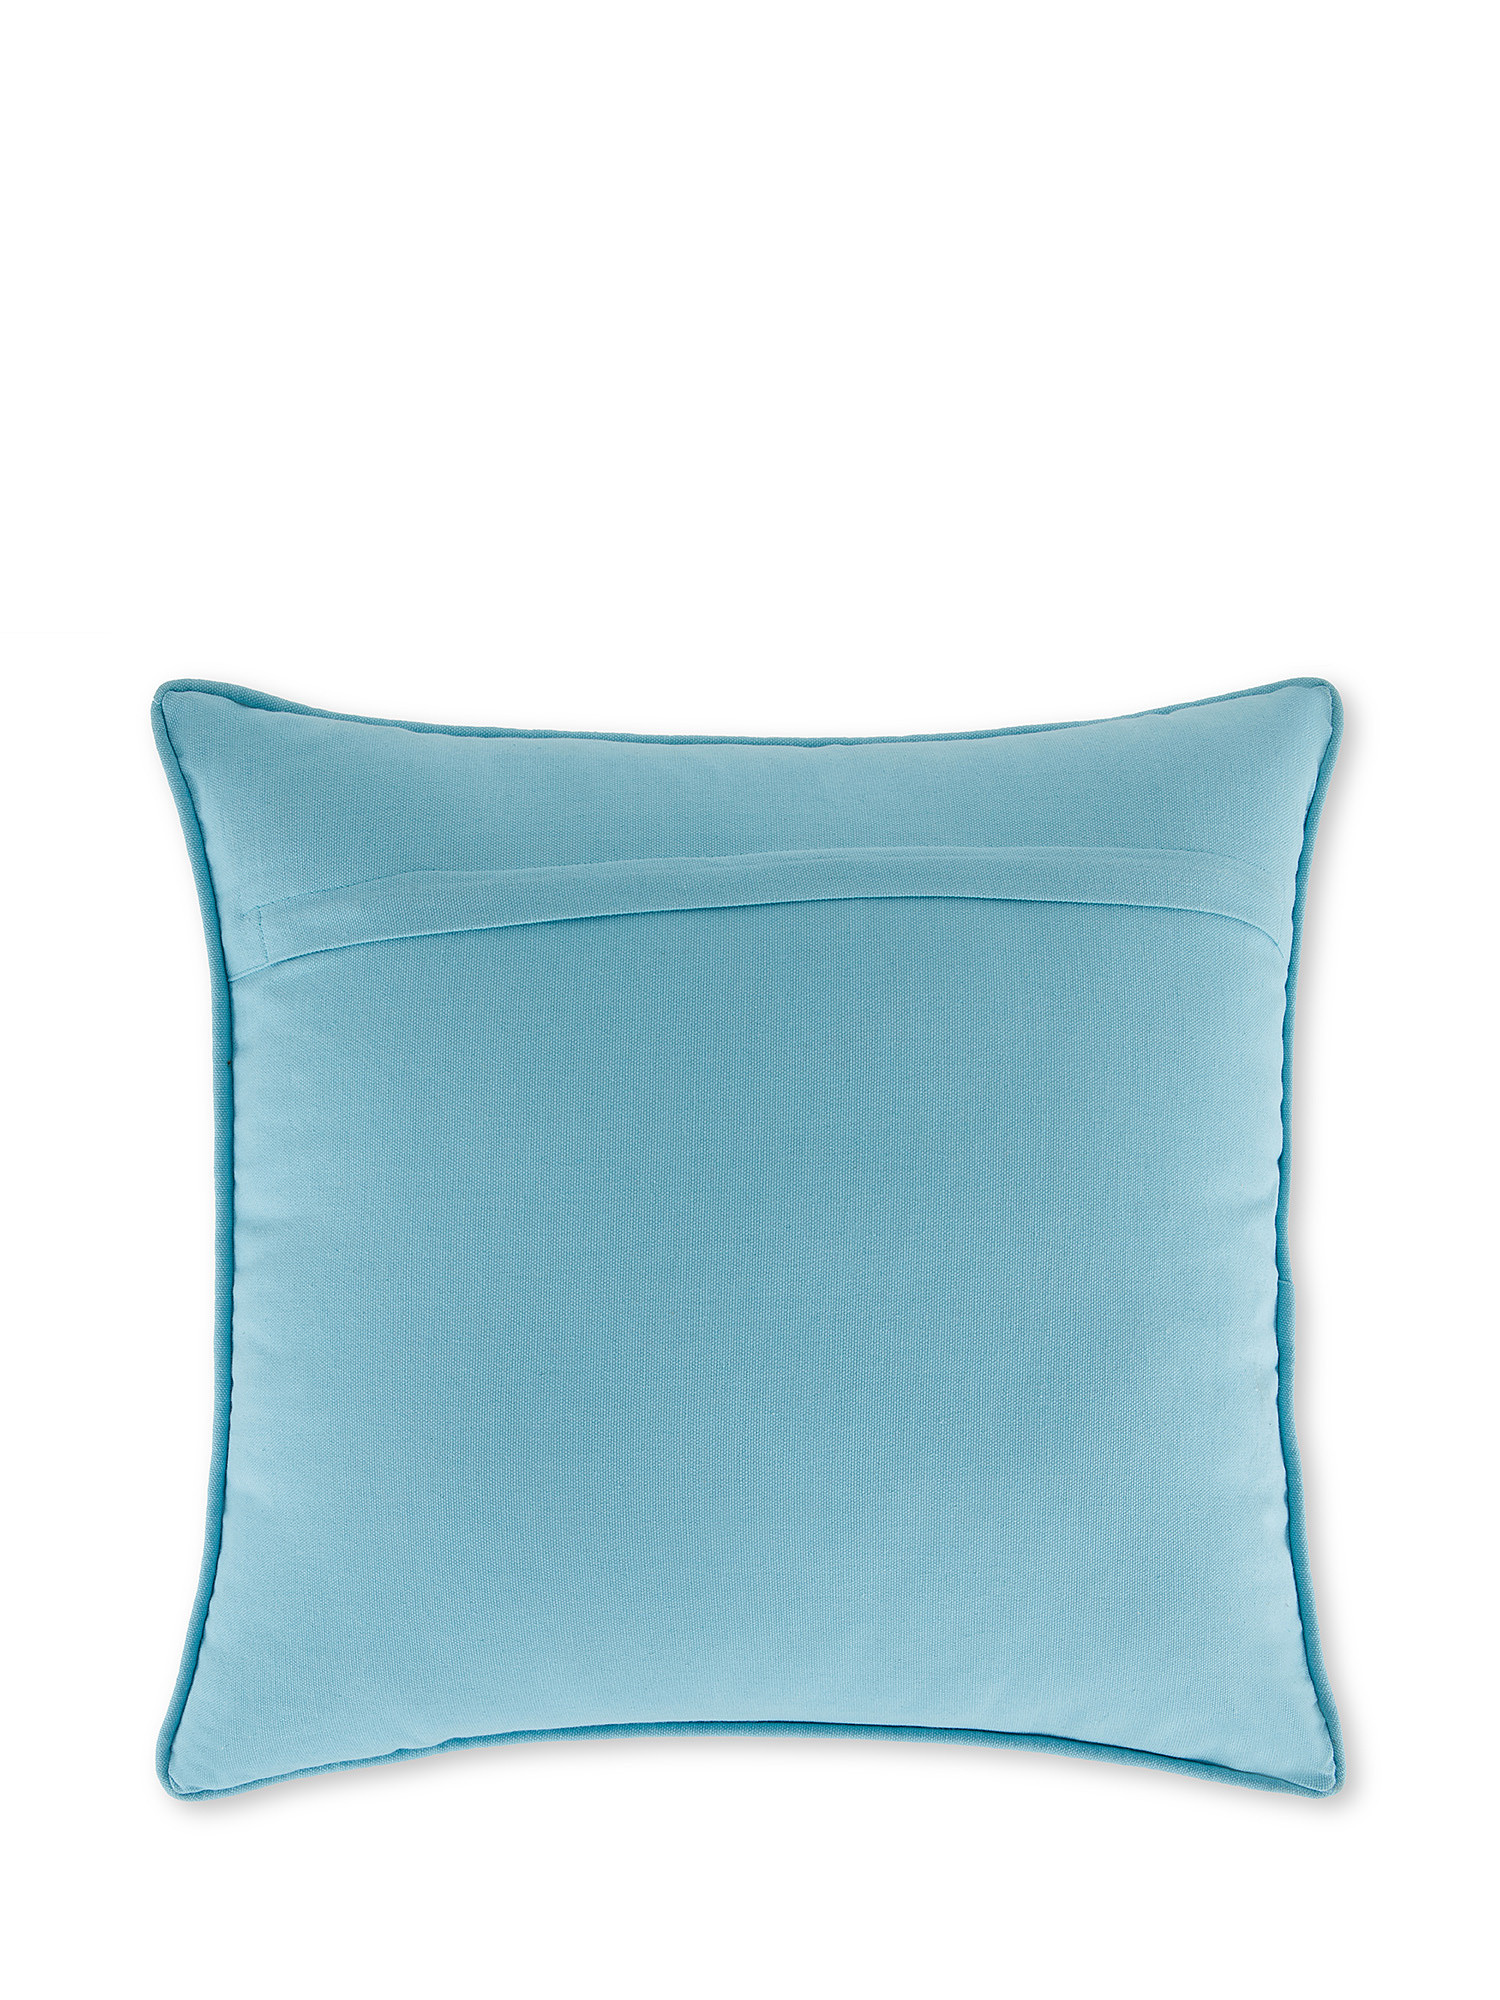 Boat embroidery cushion 45x45cm, Light Blue, large image number 1